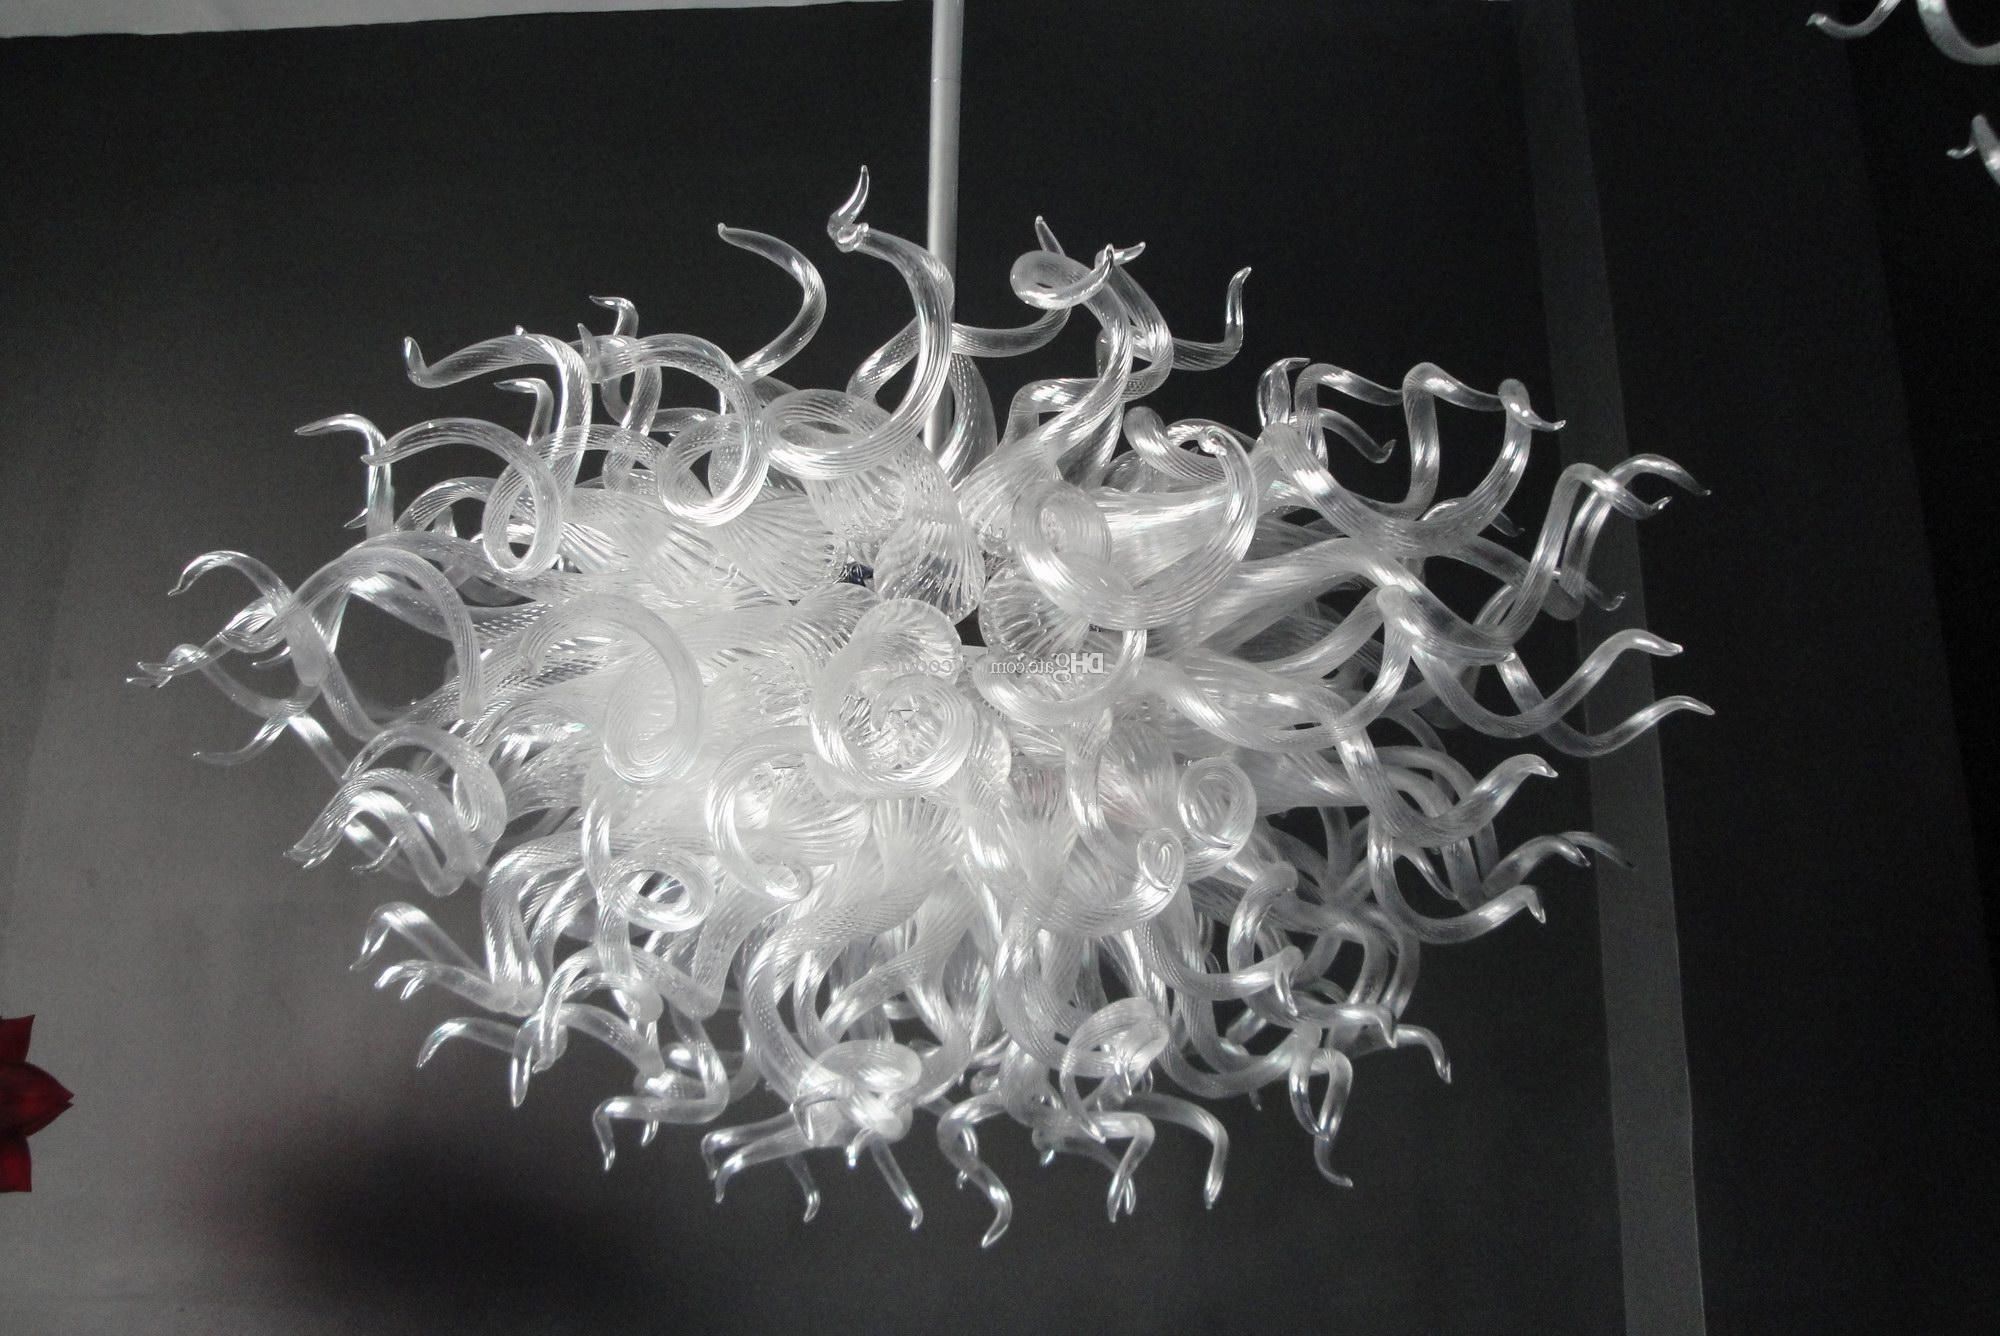 [%2018 100% Hand Blown Artistic Chandelier Lamp Dale Chihuly Murano For Recent White Contemporary Chandelier|white Contemporary Chandelier Regarding Favorite 2018 100% Hand Blown Artistic Chandelier Lamp Dale Chihuly Murano|latest White Contemporary Chandelier In 2018 100% Hand Blown Artistic Chandelier Lamp Dale Chihuly Murano|best And Newest 2018 100% Hand Blown Artistic Chandelier Lamp Dale Chihuly Murano With Regard To White Contemporary Chandelier%] (View 2 of 15)